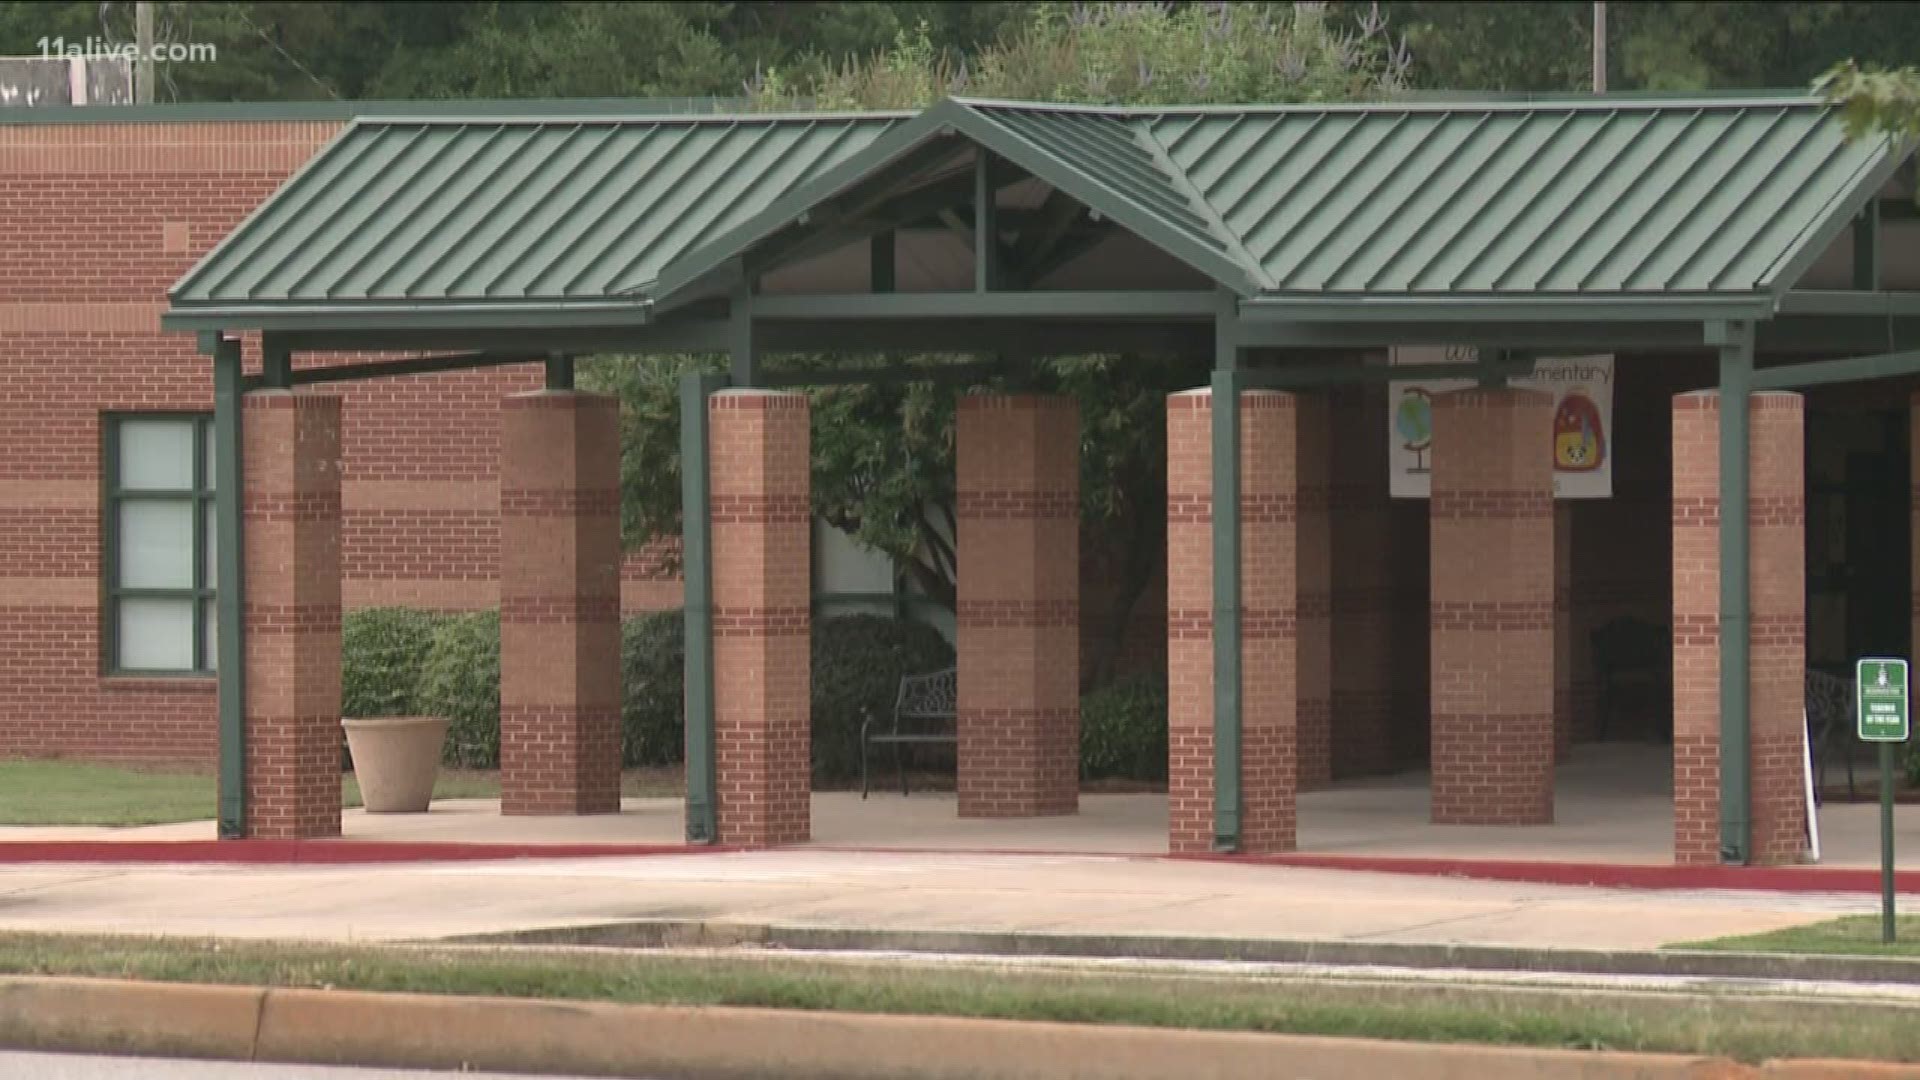 A 12-year-old boy was shot Friday evening at Peeks Chapel Elementary School in Conyers. A second boy was taken into custody in connection with the shooting.